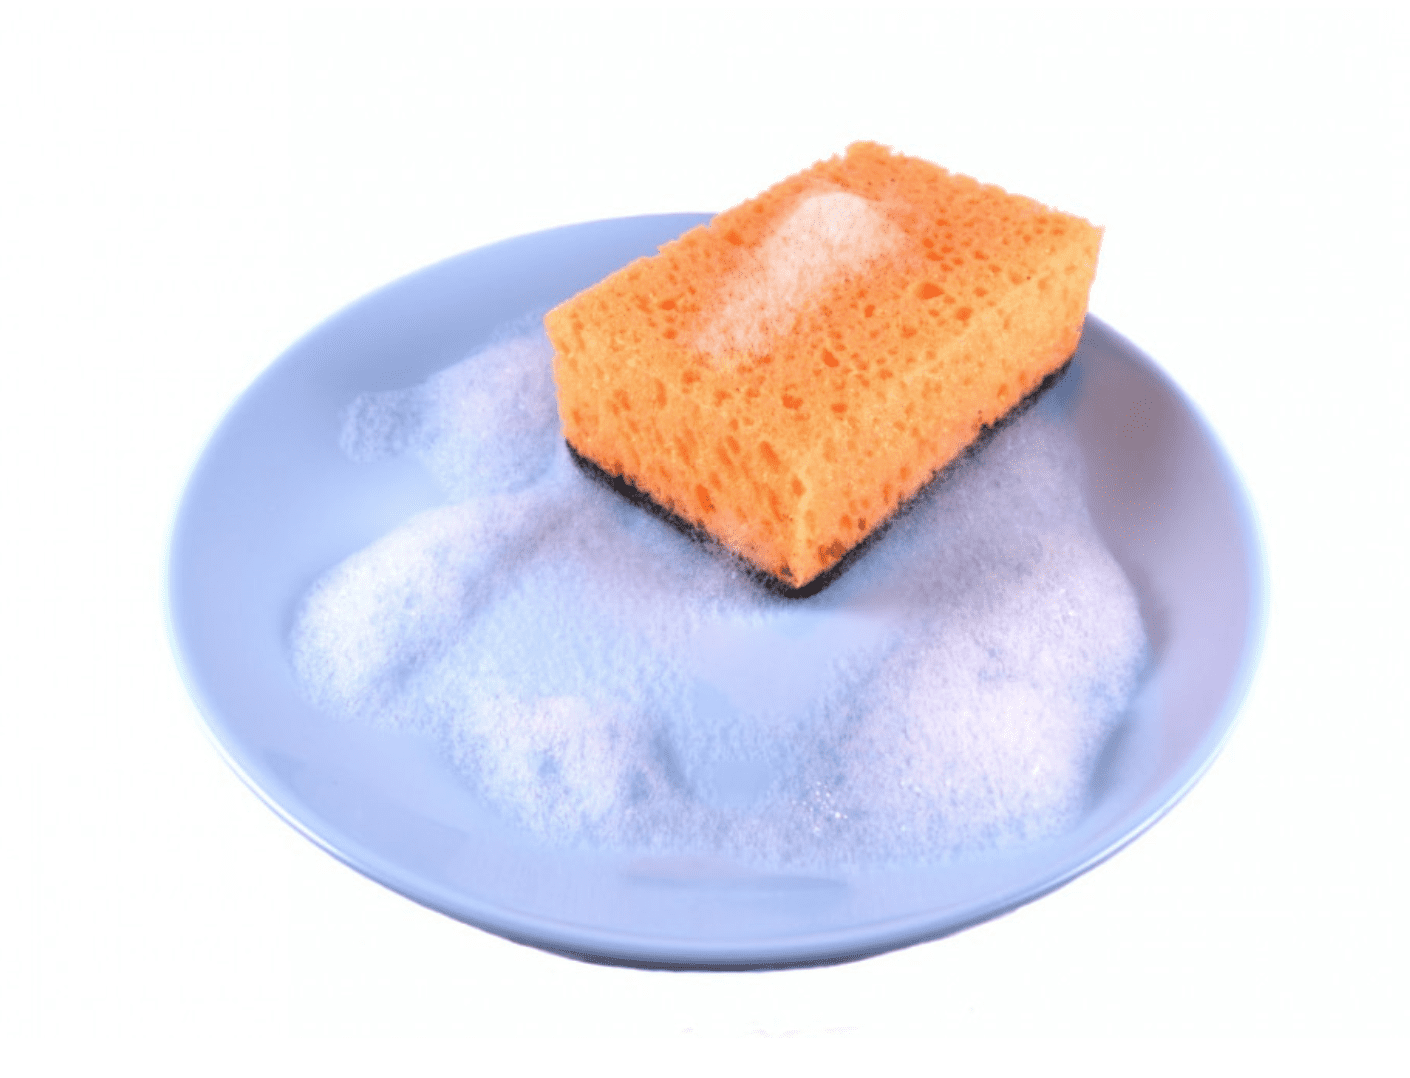 What Makes Kitchen Sponges Smell? - Sponge and dish